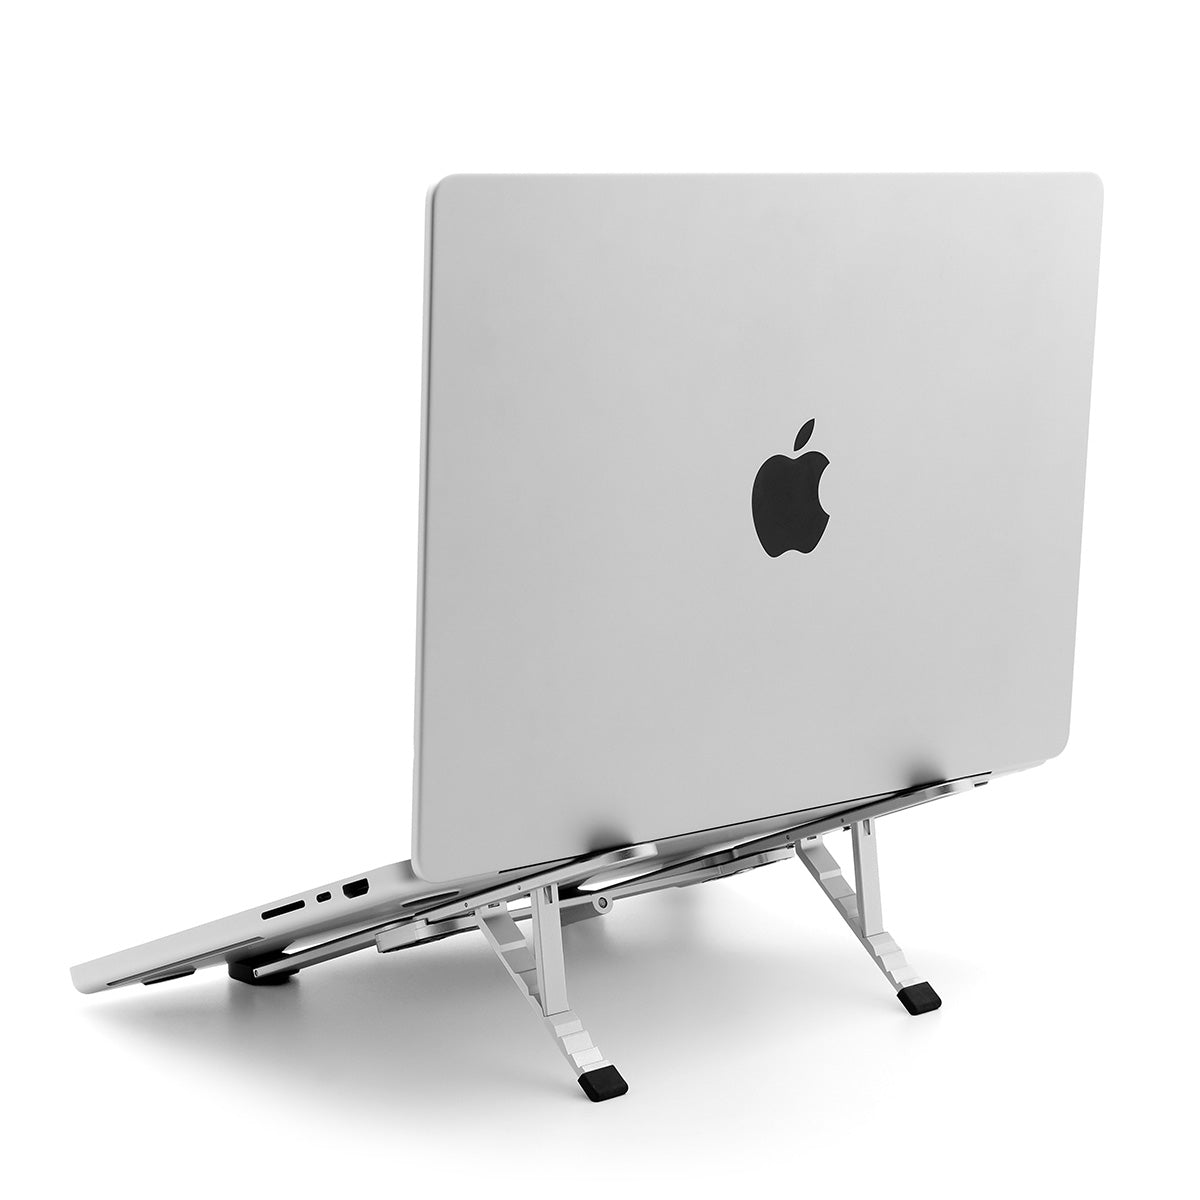 NSMO Laptop Stand Foldable Adjustable Height MacBook Pro Gaming Cooling